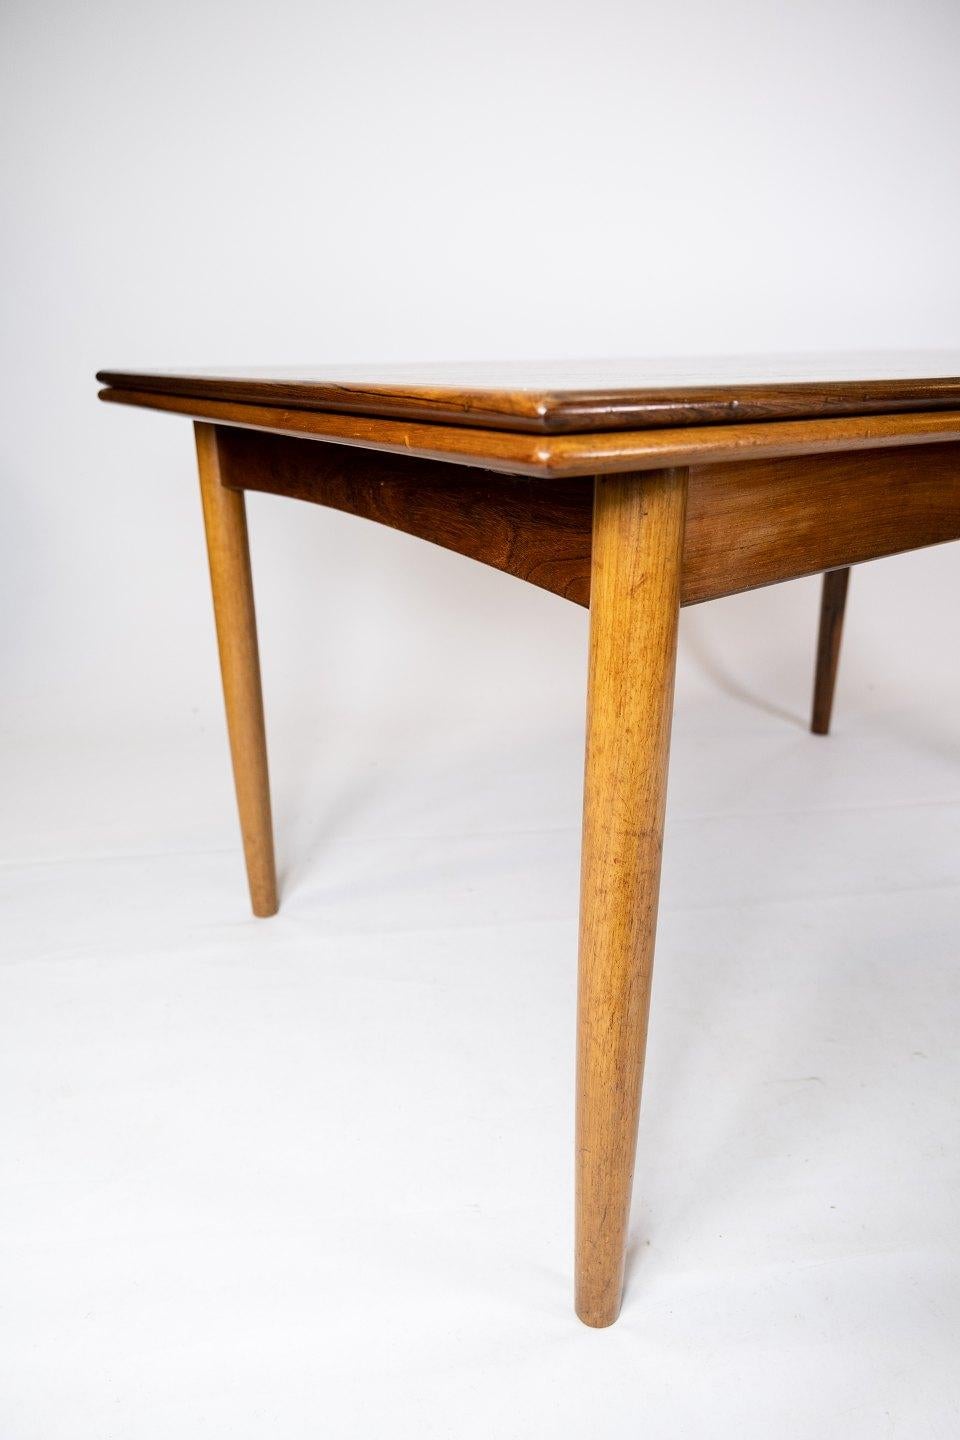 Scandinavian Modern Dining Table in Rosewood with Extensions of Danish Design from the 1960s